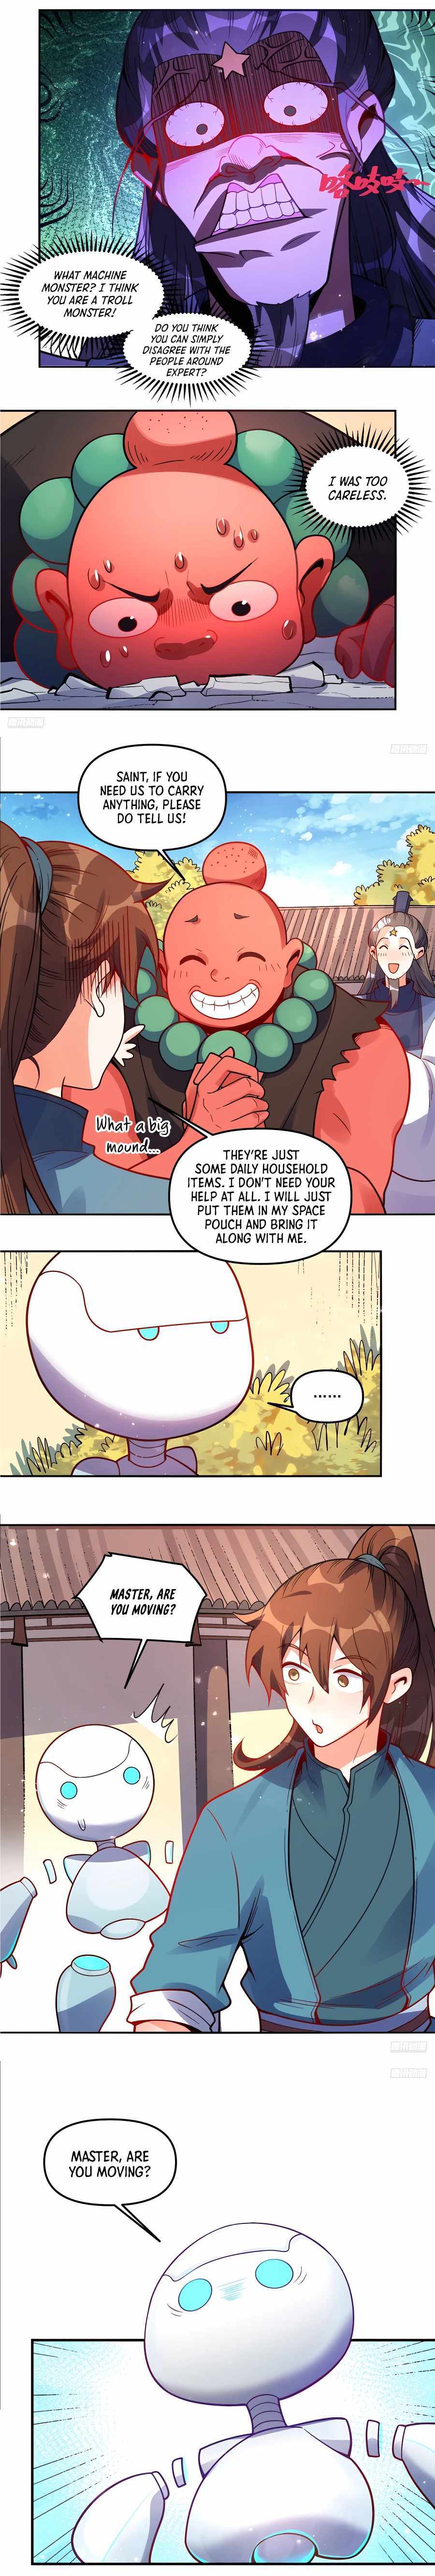 I’M Actually A Cultivation Bigshot - Page 3